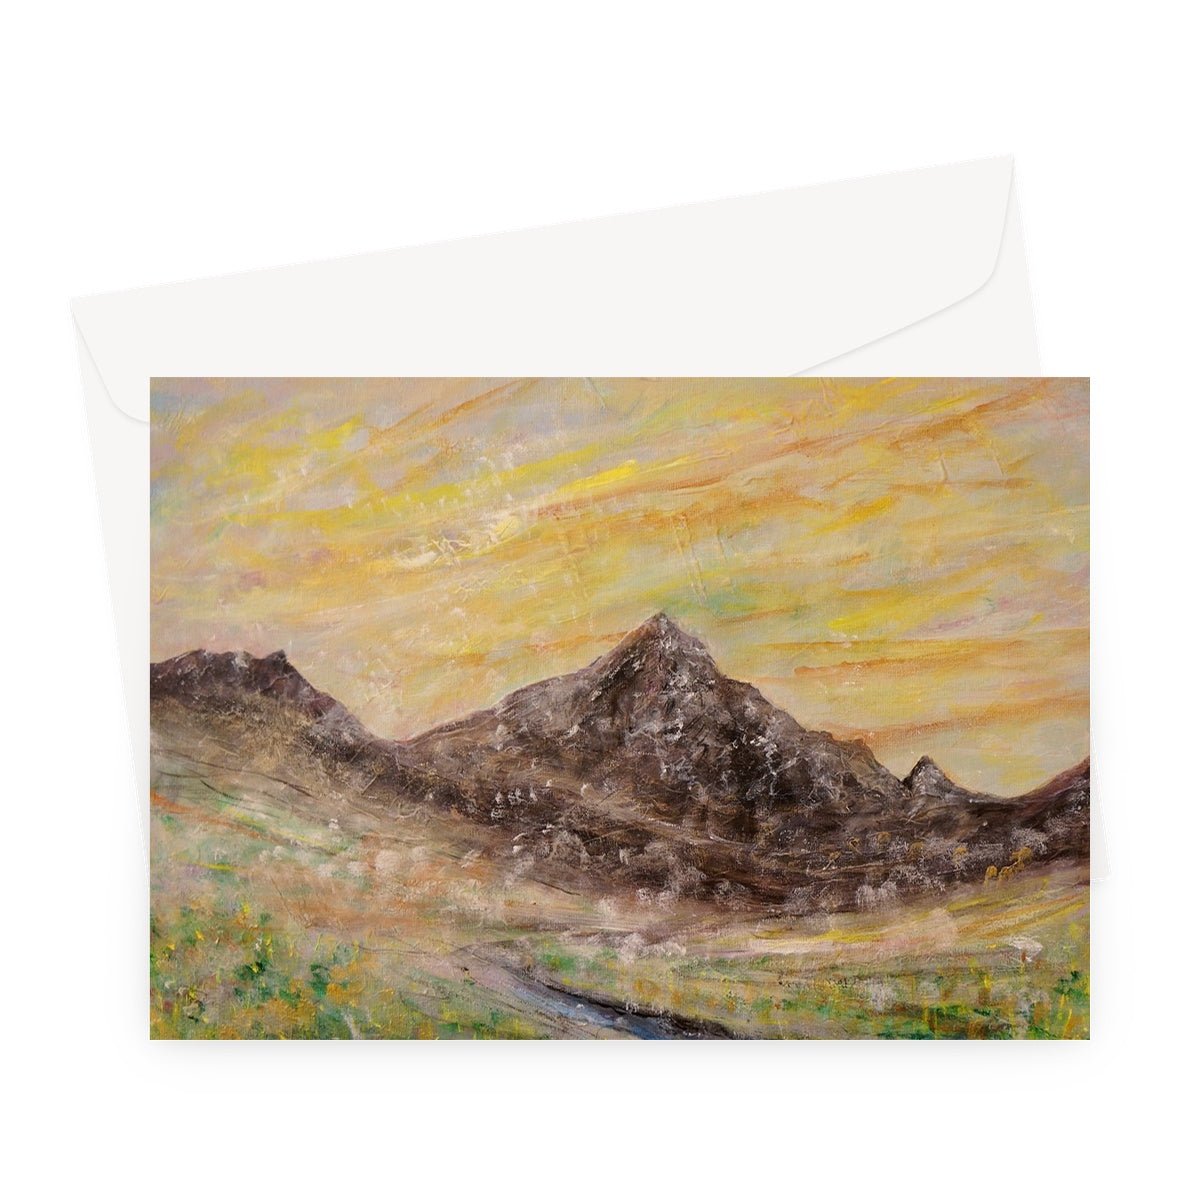 Glen Rosa Mist Arran Art Gifts Greeting Card-Greetings Cards-Arran Art Gallery-A5 Landscape-1 Card-Paintings, Prints, Homeware, Art Gifts From Scotland By Scottish Artist Kevin Hunter